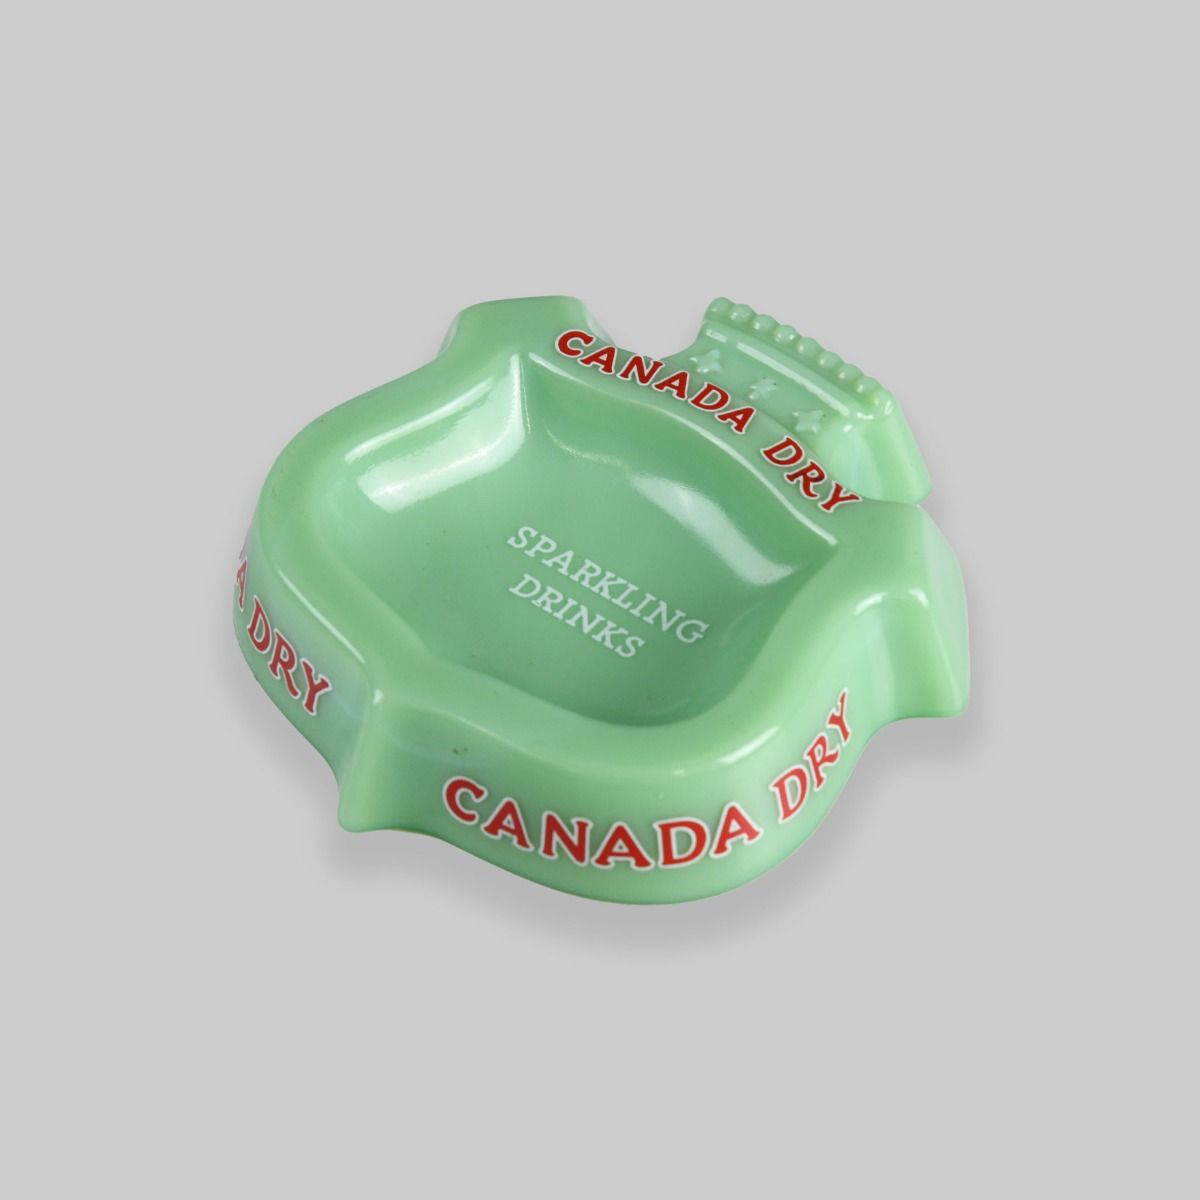 Vintage 1970s Canada Dry Green Glass Ashtray